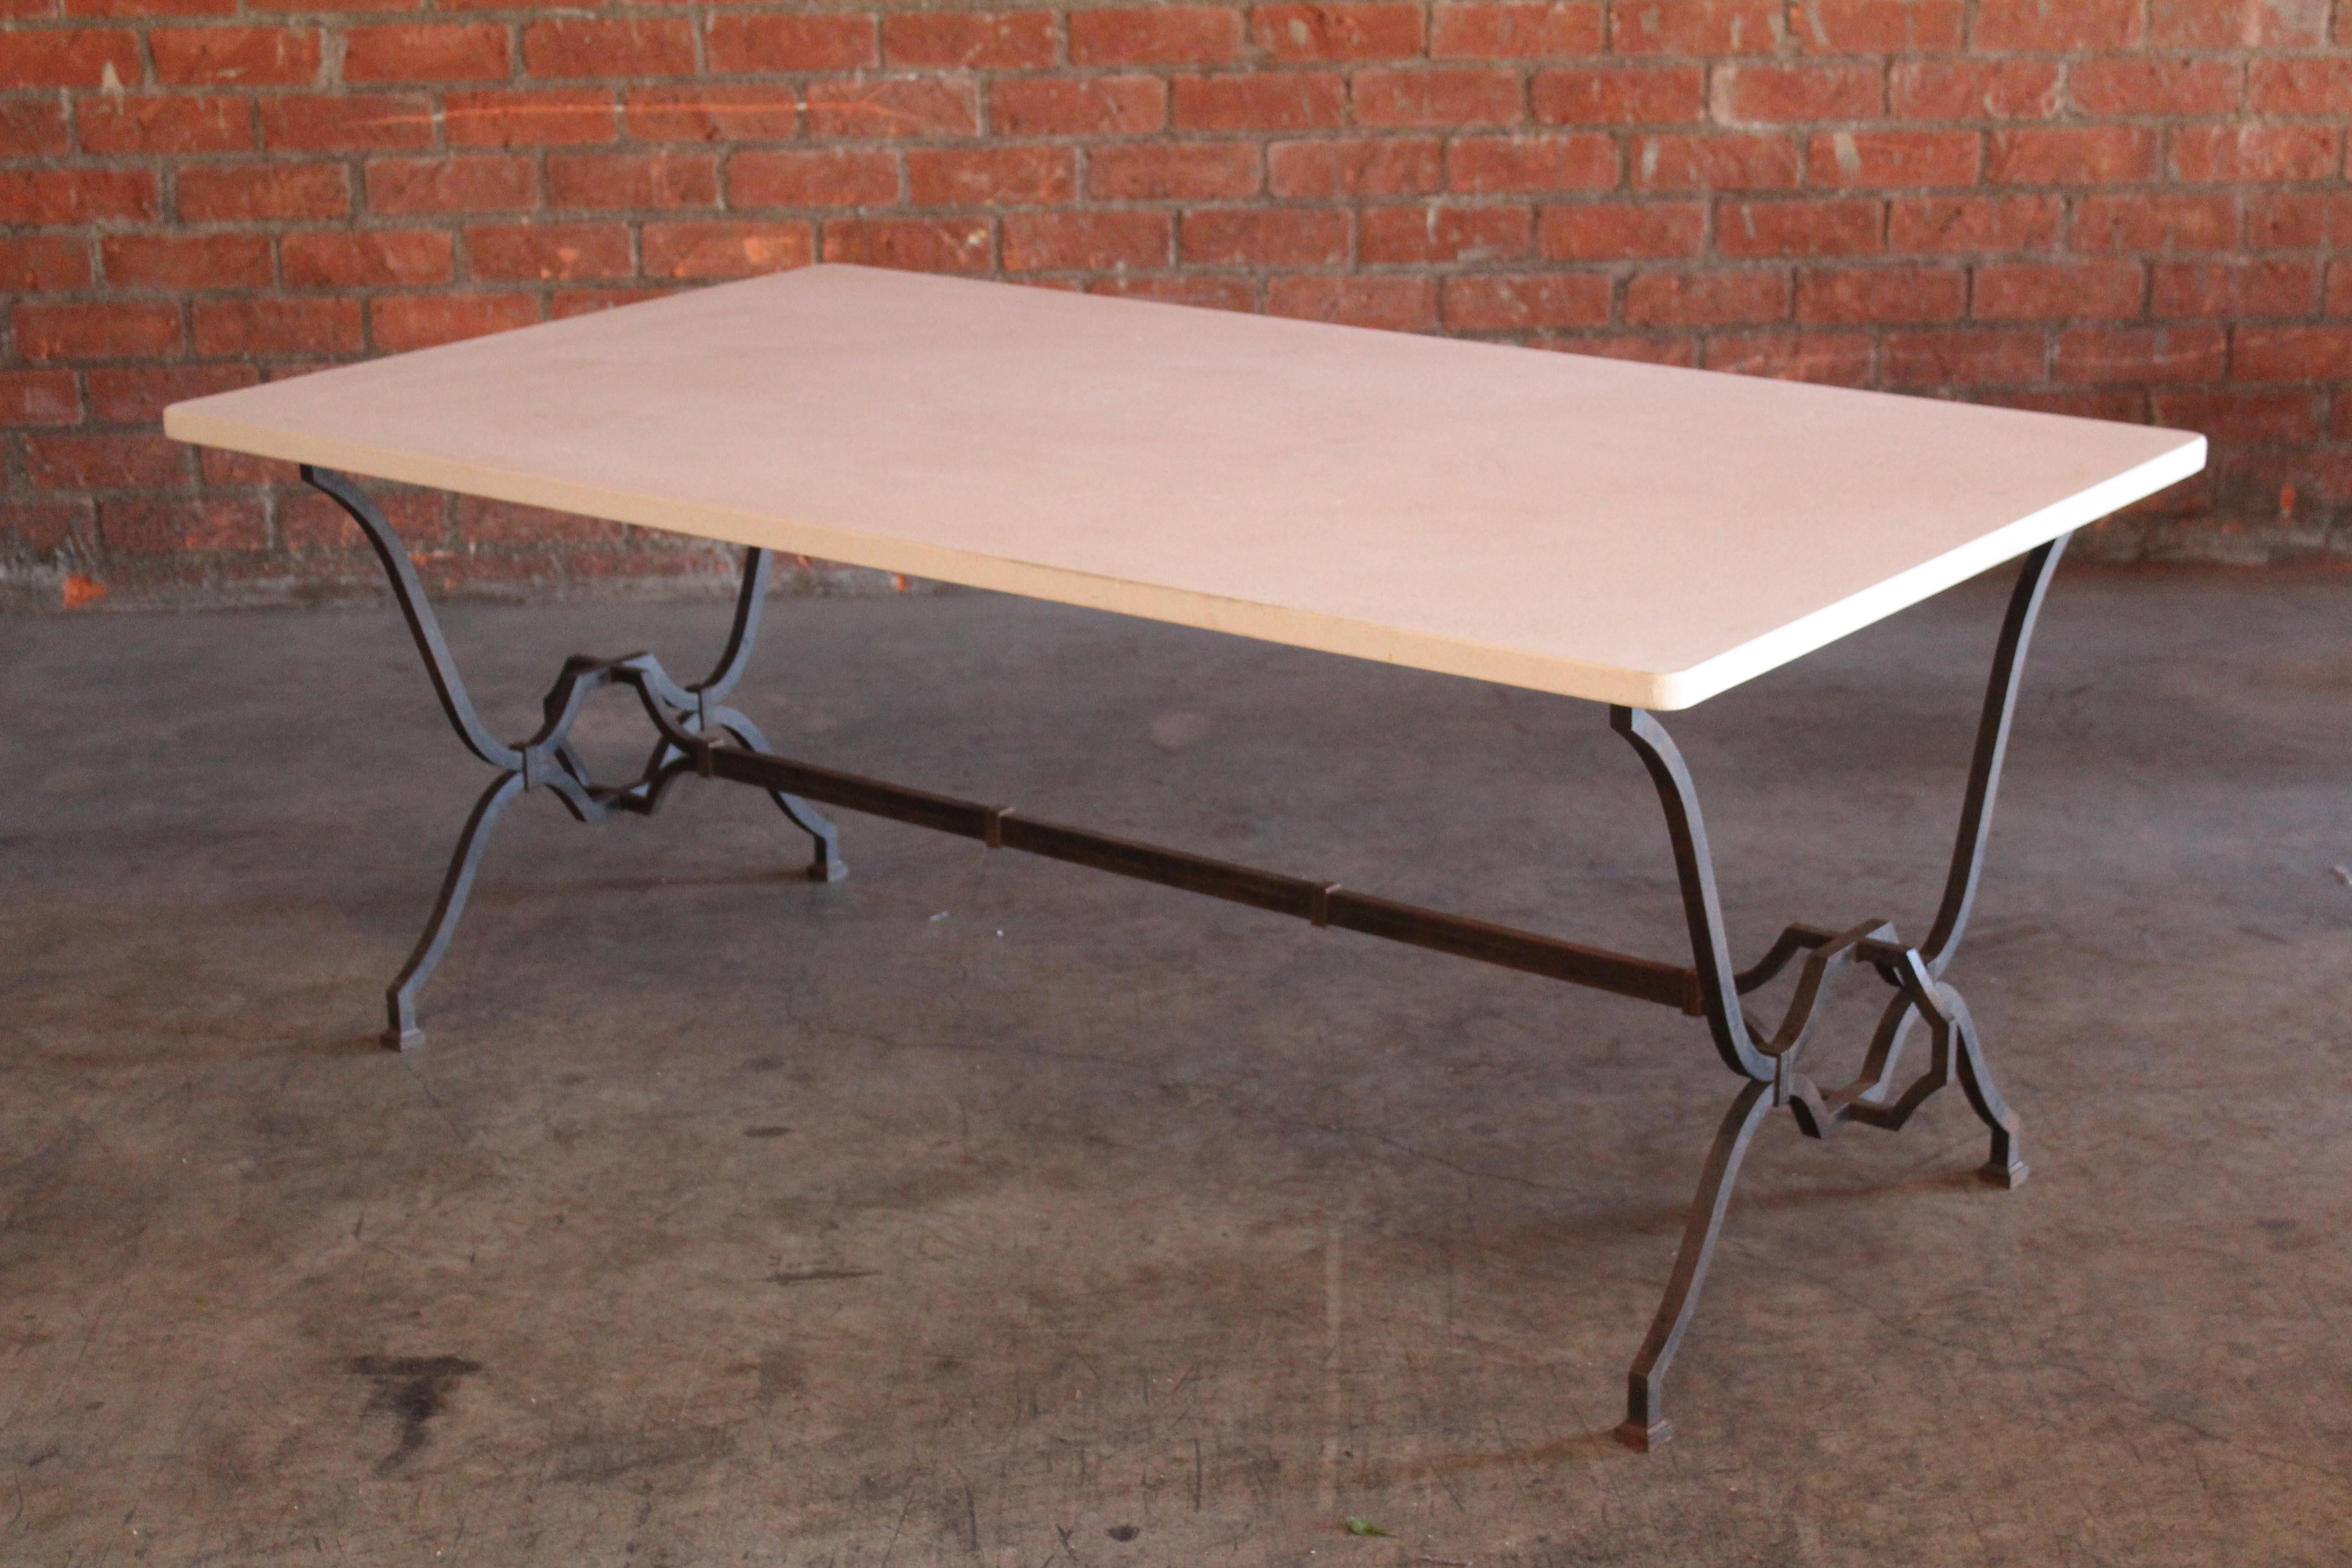 1940s French Wrought Iron and Limestone Table by Colette Gueden for René Prou For Sale 13